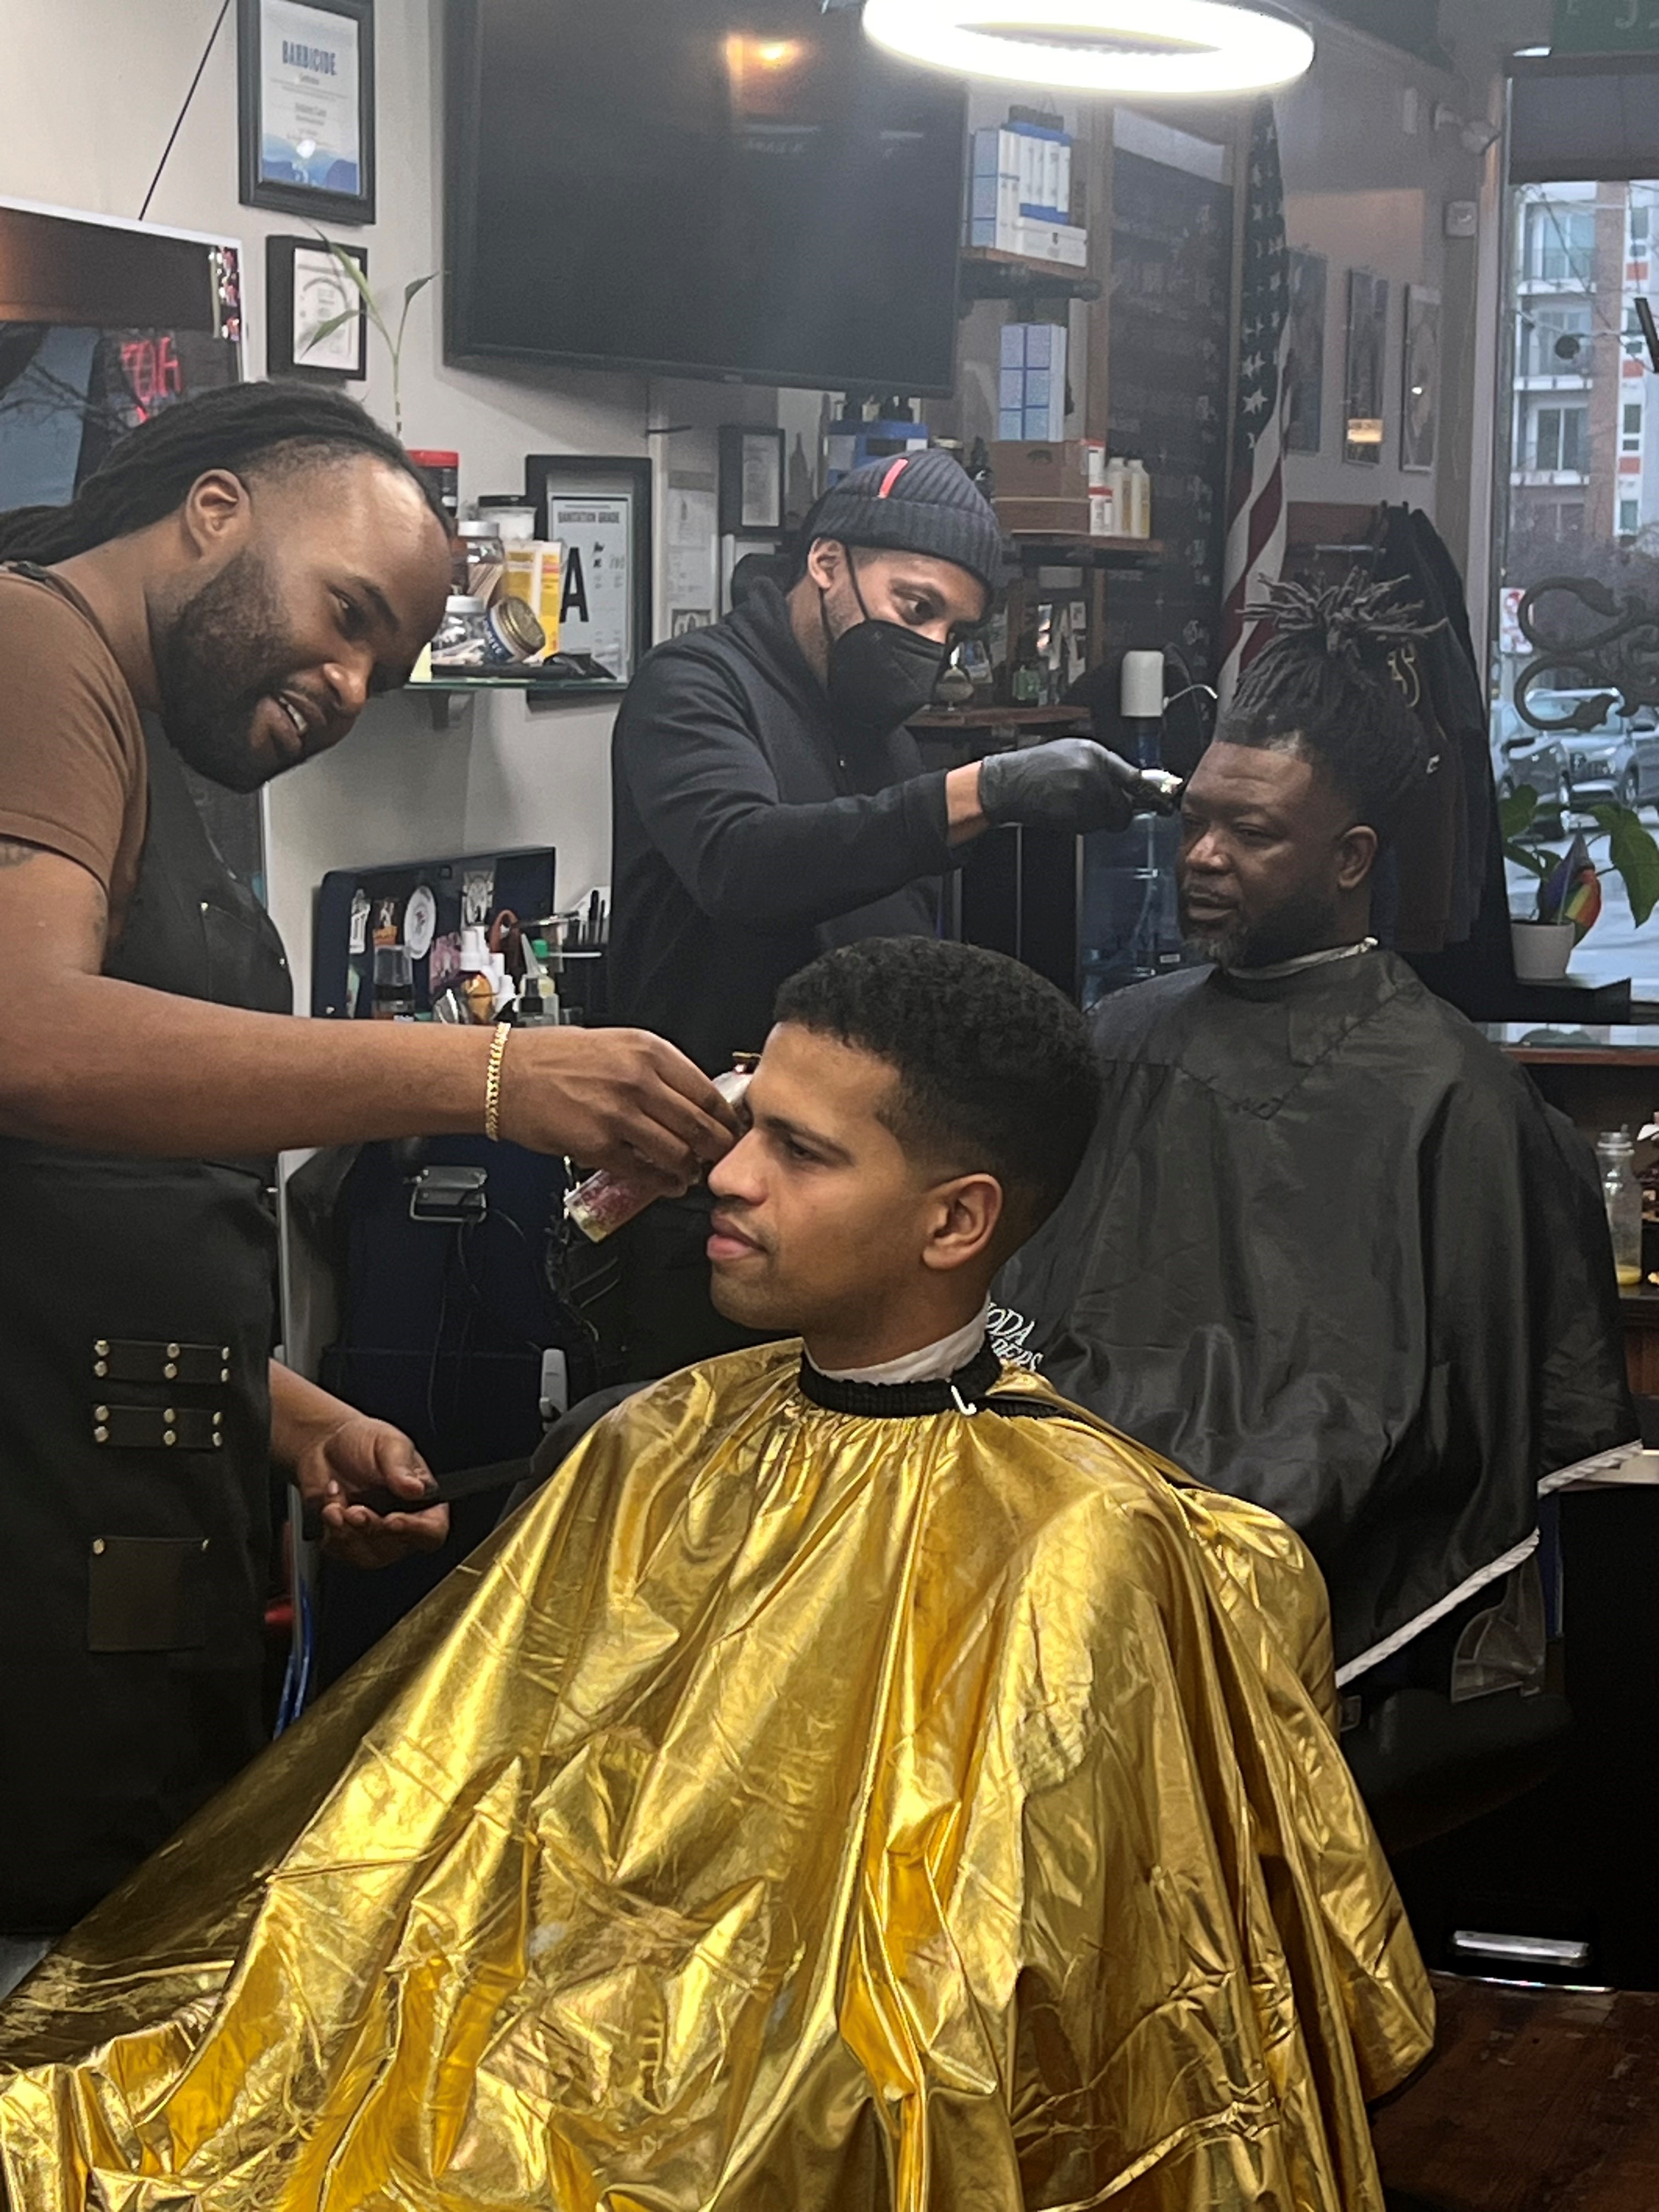 Clients being serviced at Noda Barbers.